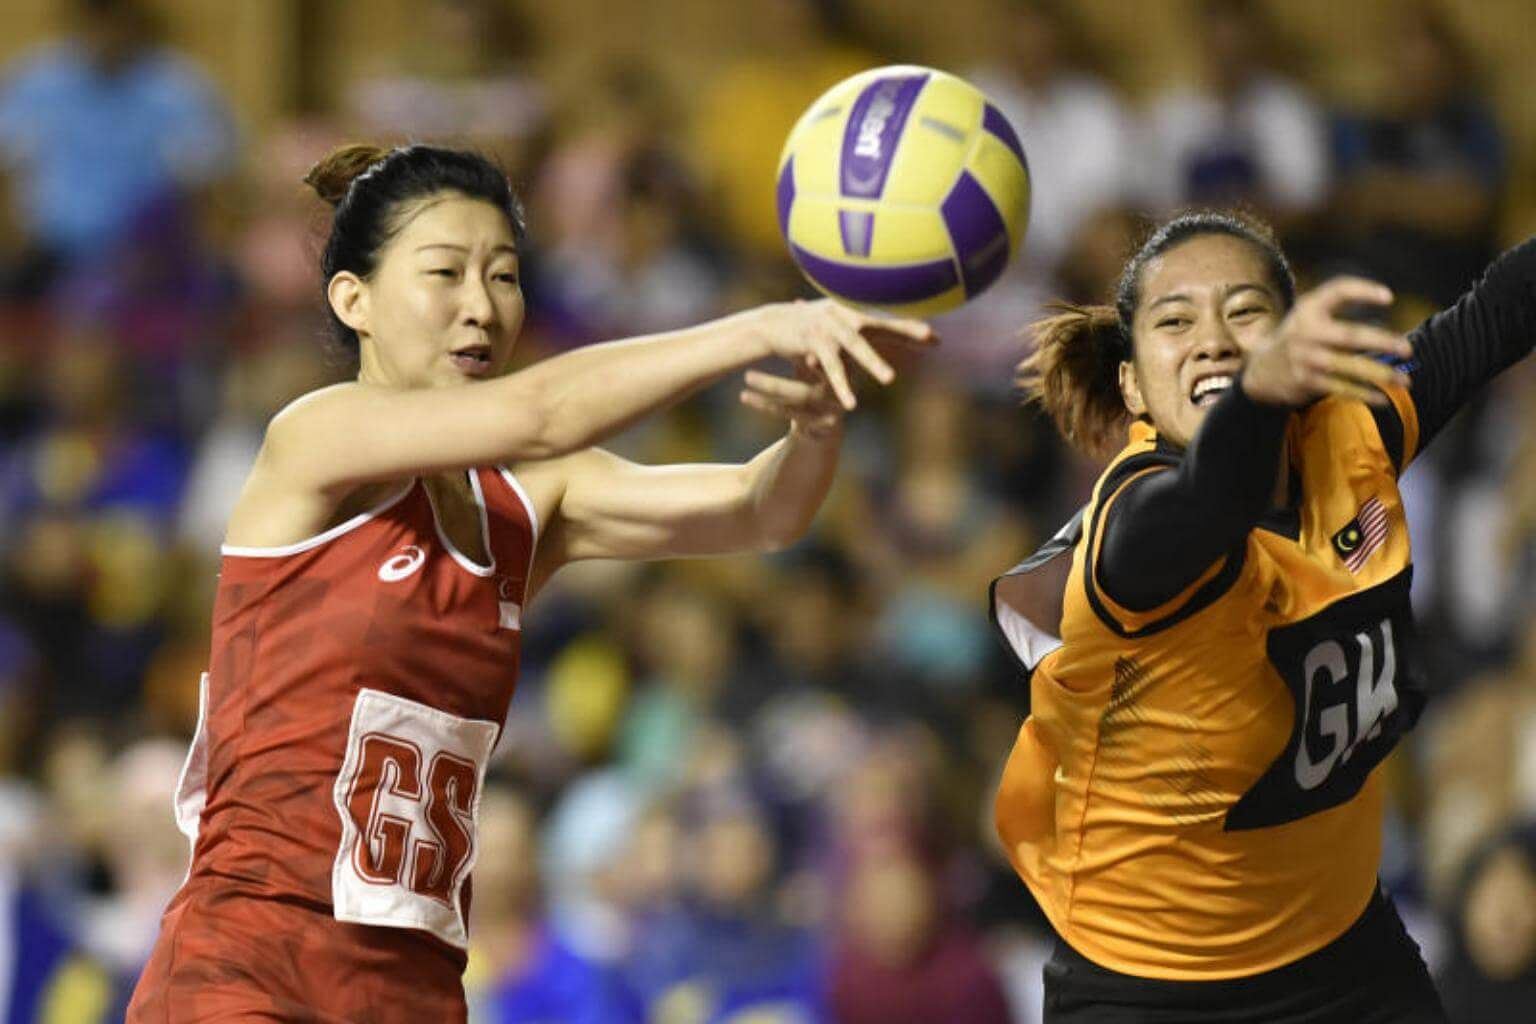 Sea Games Singapore S Netball Team Lose Crown To Malaysia Following 65 41 Trouncing In Final Sport News Top Stories The Straits Times